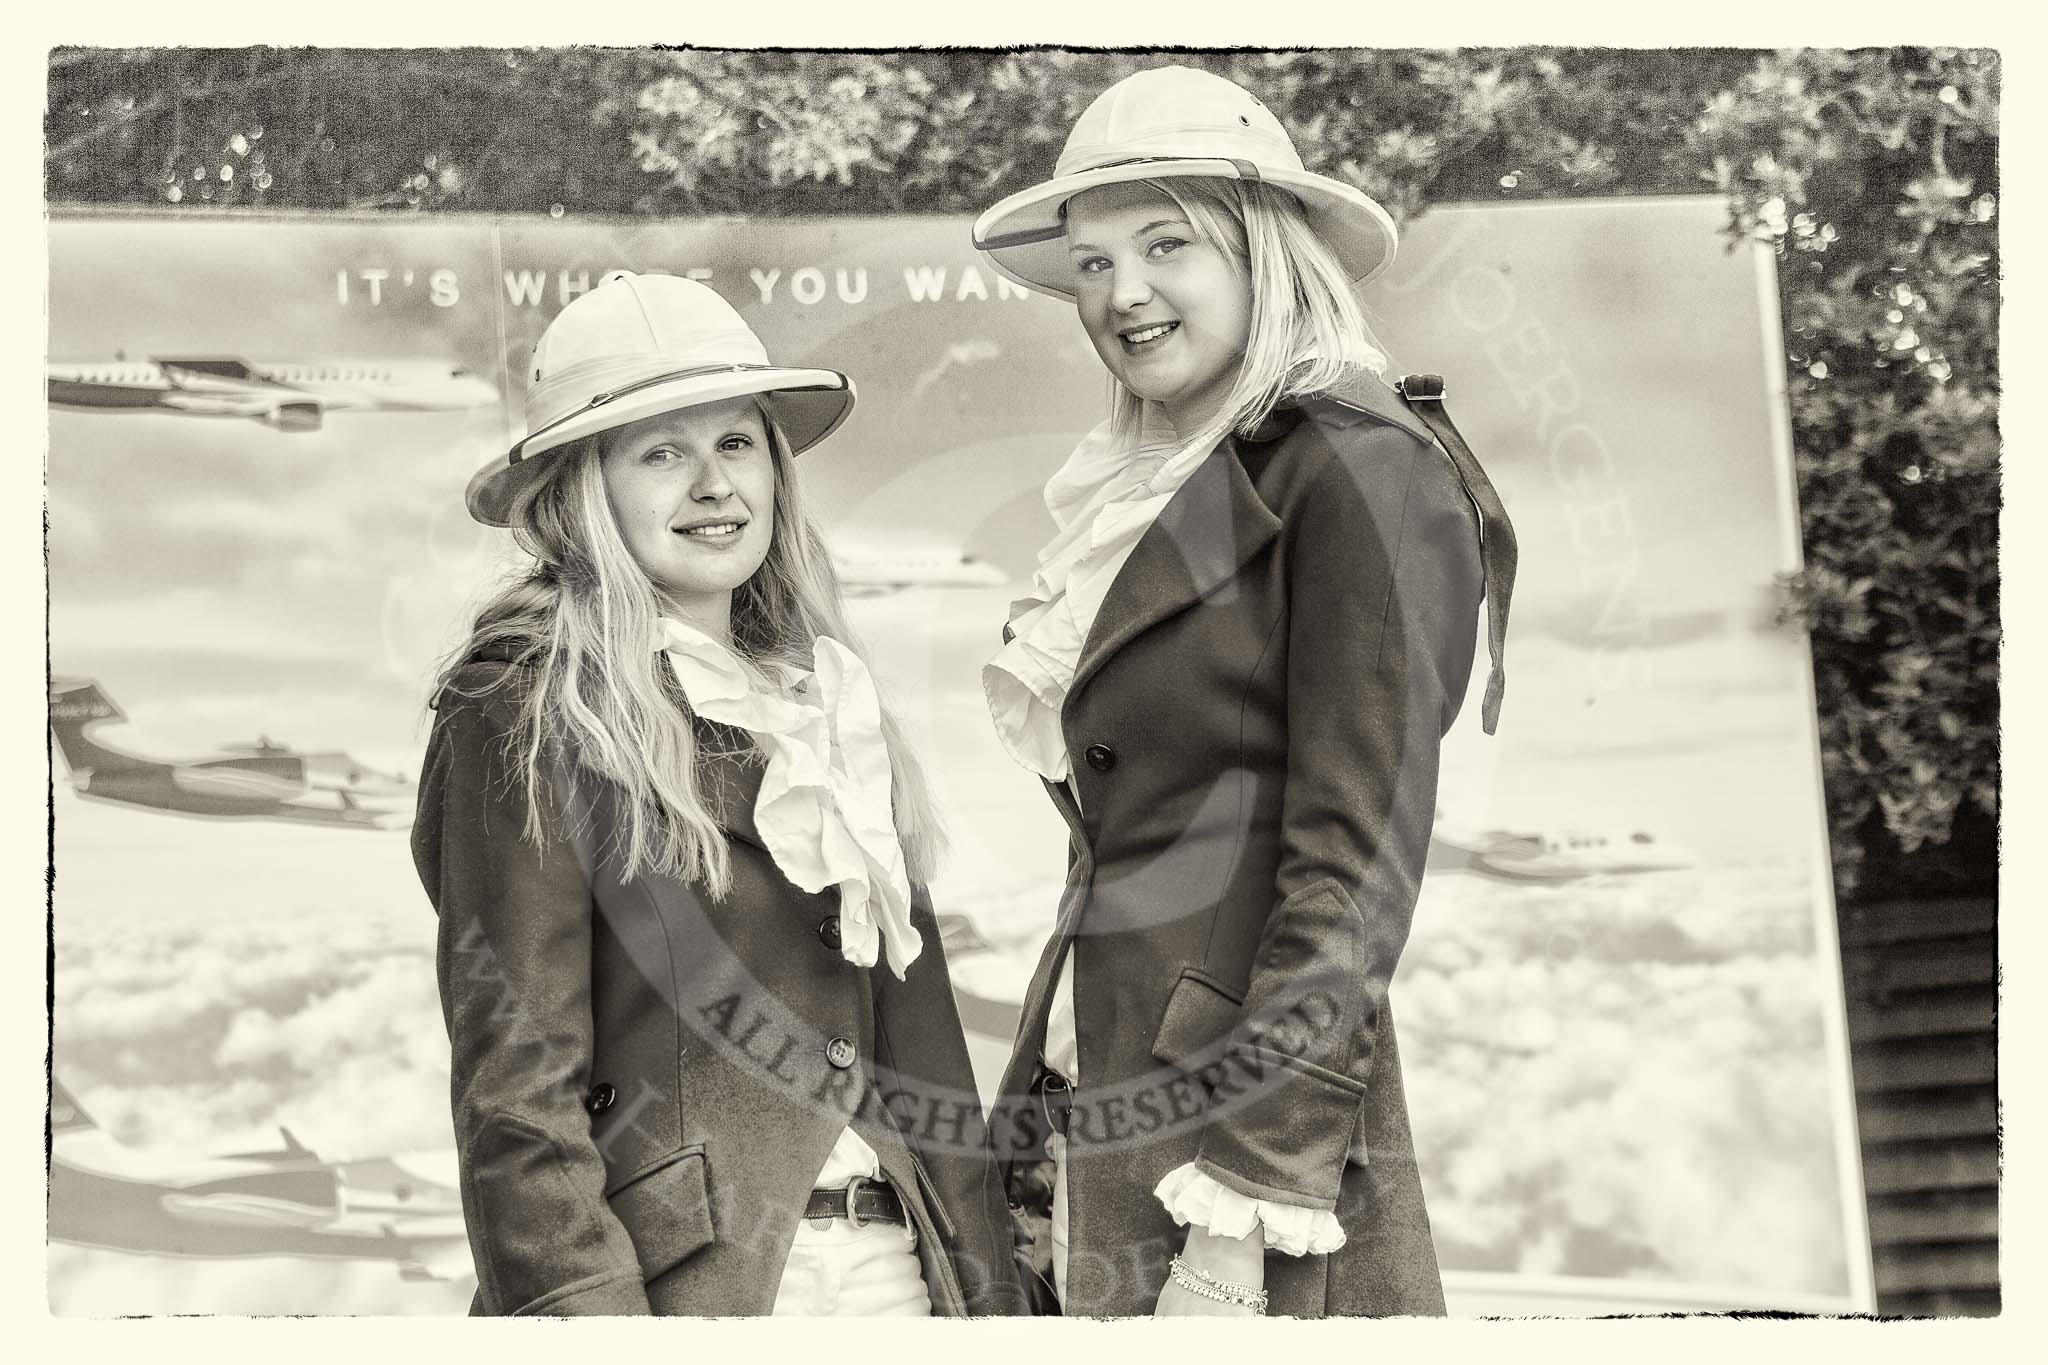 7th Heritage Polo Cup finals: Liberty Freedom Sandhurst Red Coats & Ascot Top Hats Pith Helmets worn by Camilla Lovegrove and Serena Lillington-Price at the Entrance of  Hurtwood Park Polo Club..
Hurtwood Park Polo Club,
Ewhurst Green,
Surrey,
United Kingdom,
on 05 August 2012 at 11:58, image #3